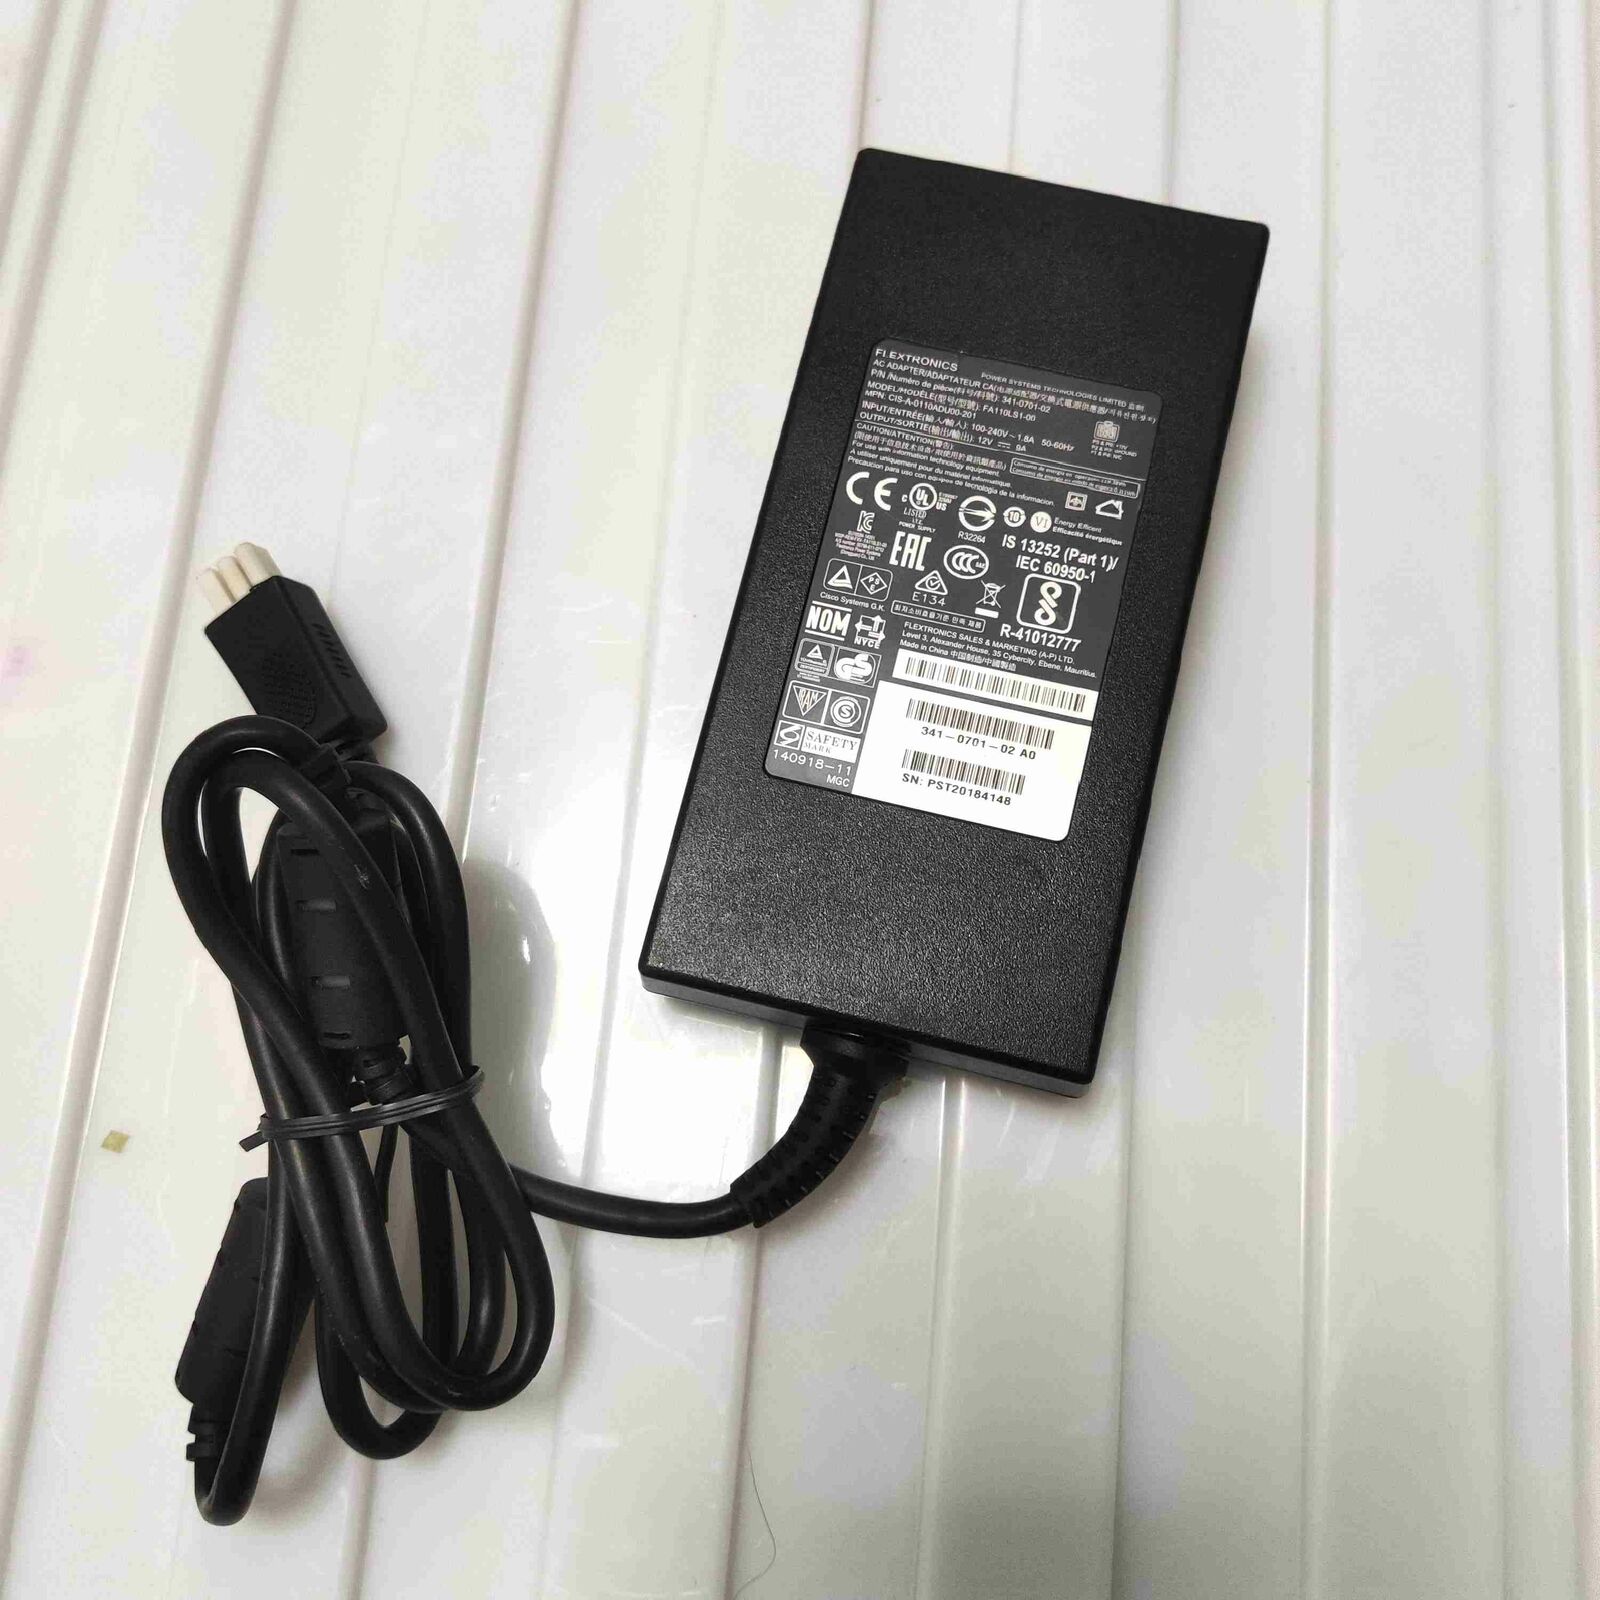 1pcs FOR ISR 4321 PWR-4320 AC Power Supply FA110LS1-00 12V 9A Brand: Unbranded/Generic Compatible Brand: Universal M